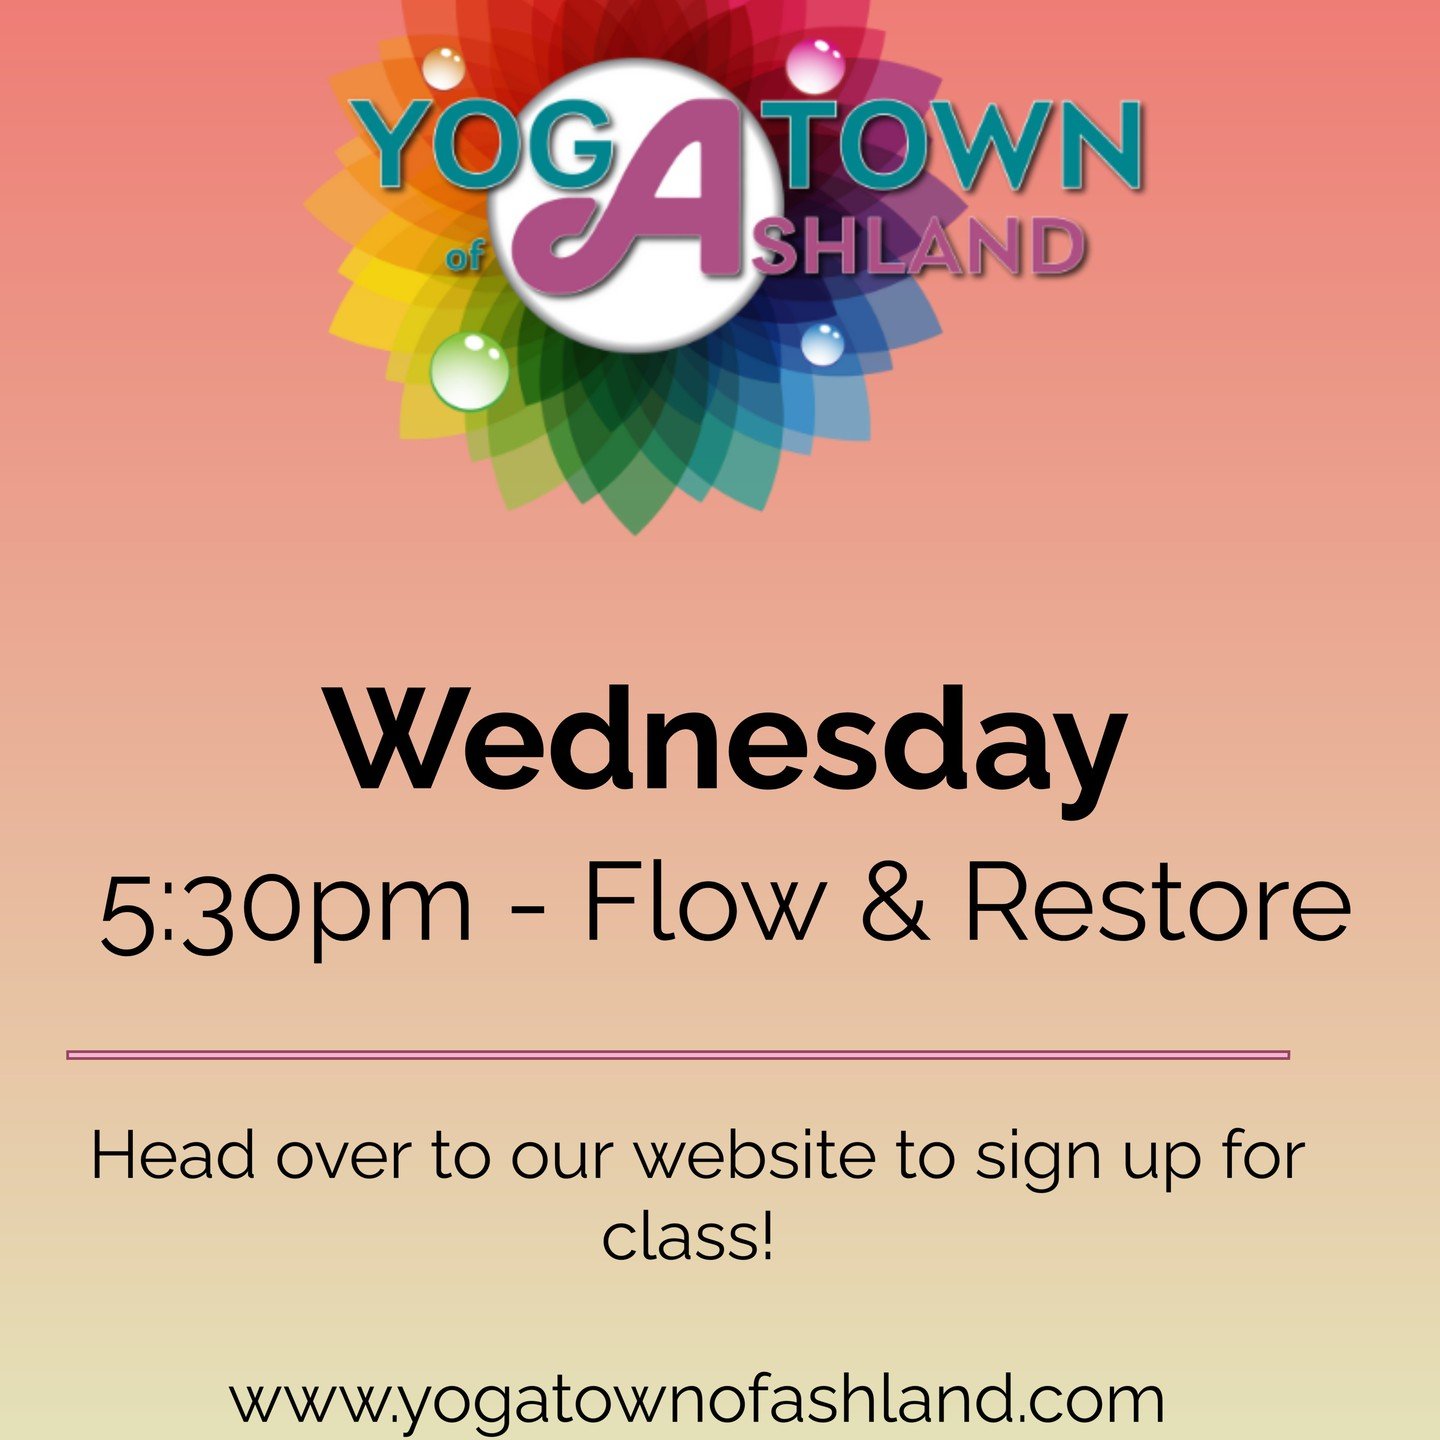 Happy Wednesday! Join us this evening for a Flow &amp; Restore class with Becky... See you there!! #yogatownofashland #ashlandva #yogalife #practiceisprogress #flow #restore #yoga #selfcare #stressmanagement #selflove #hanoverva #hanovercountyva #loc